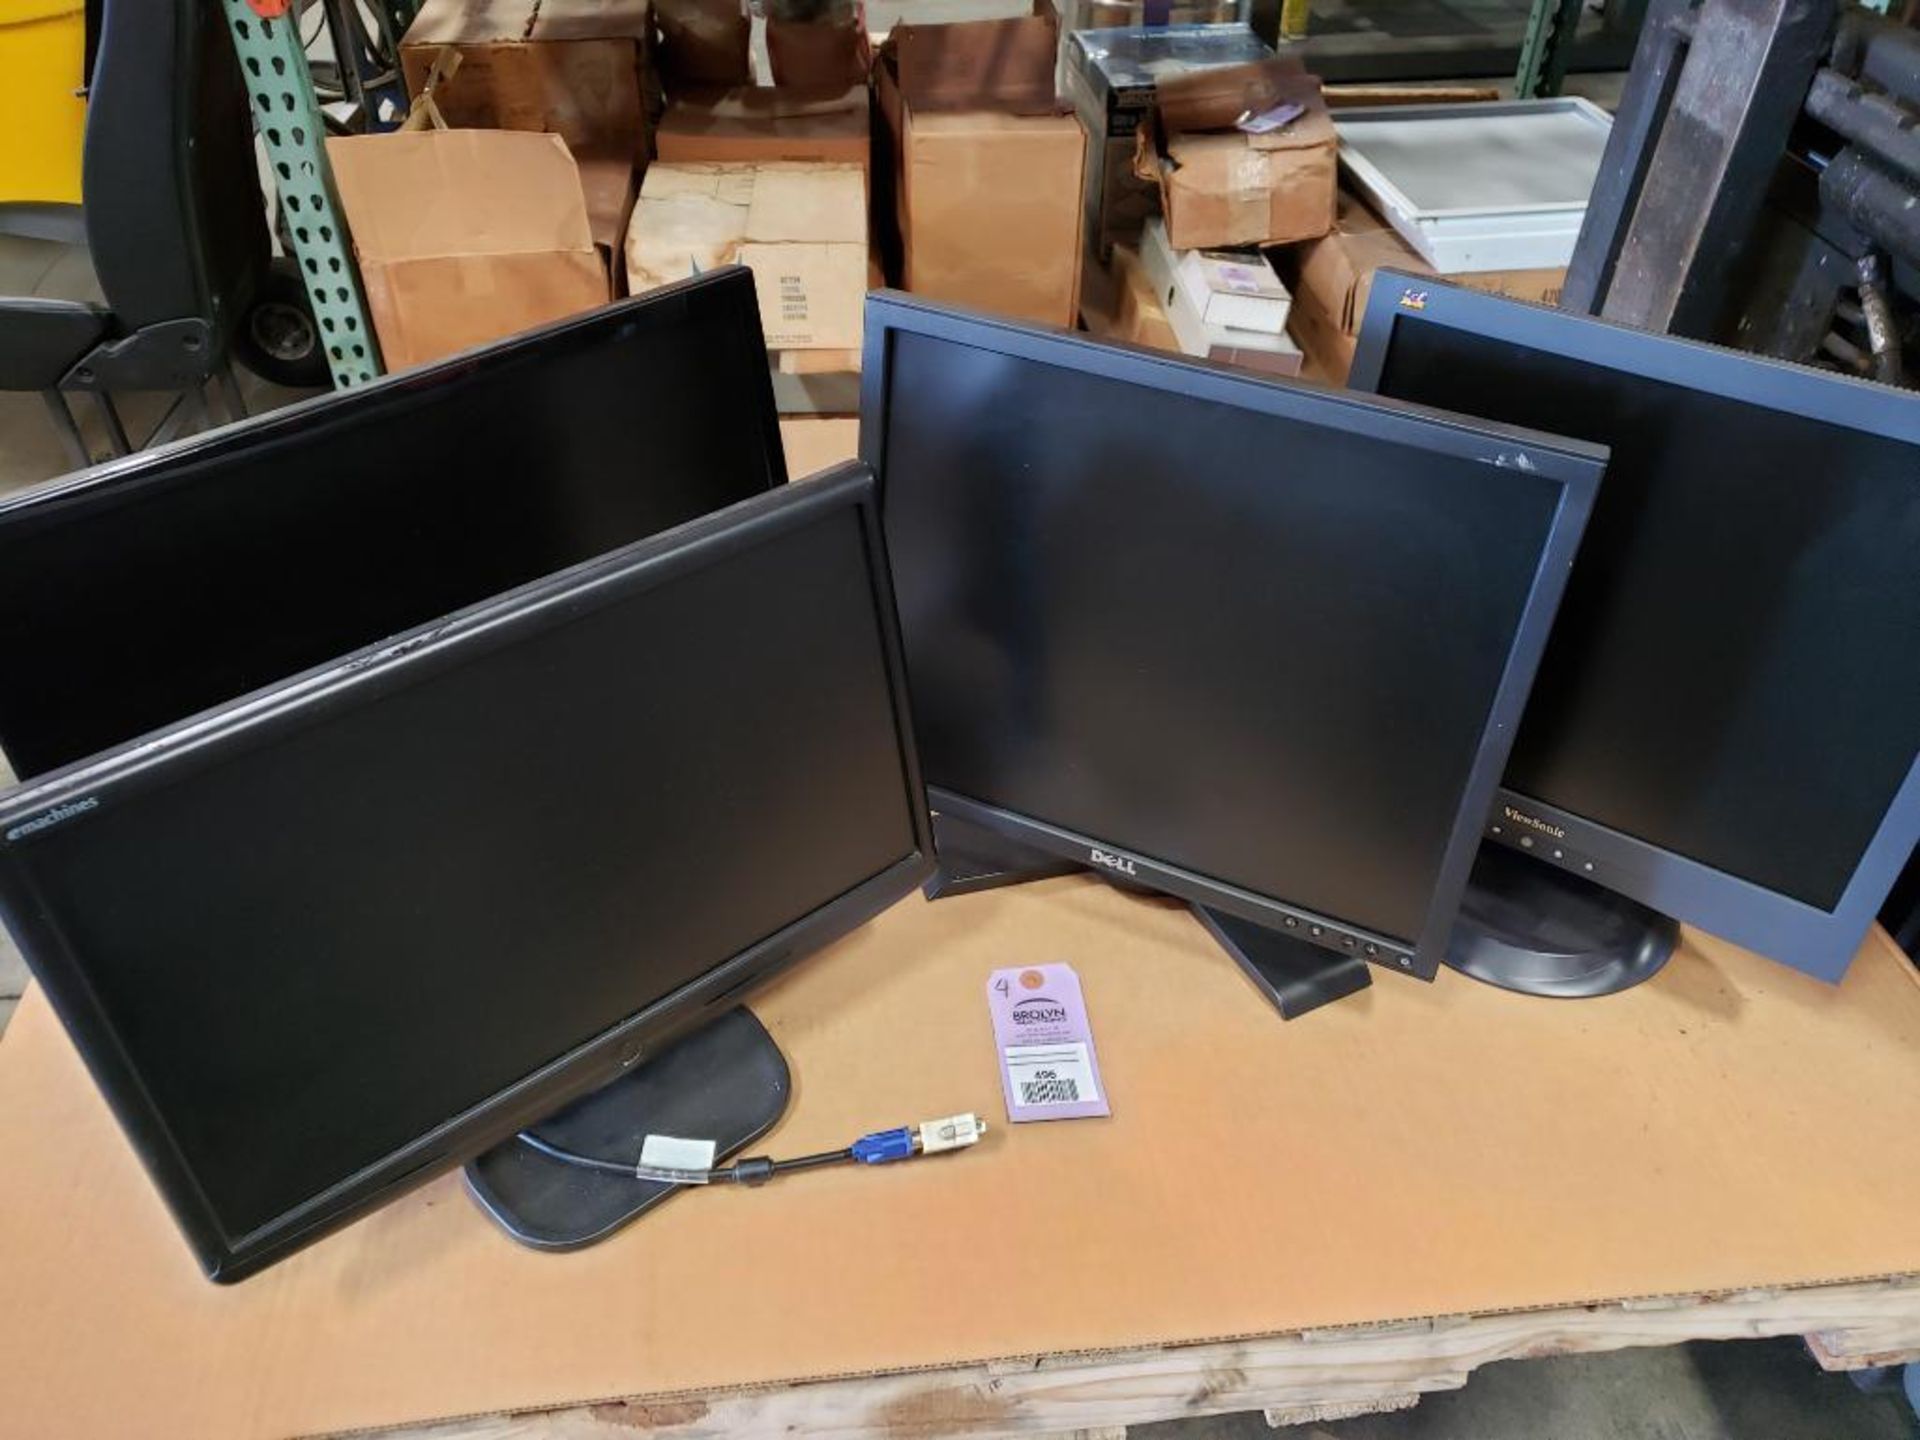 Qty 4 - Assorted desktop monitors. emachines, HP, Dell, Viewsonic.